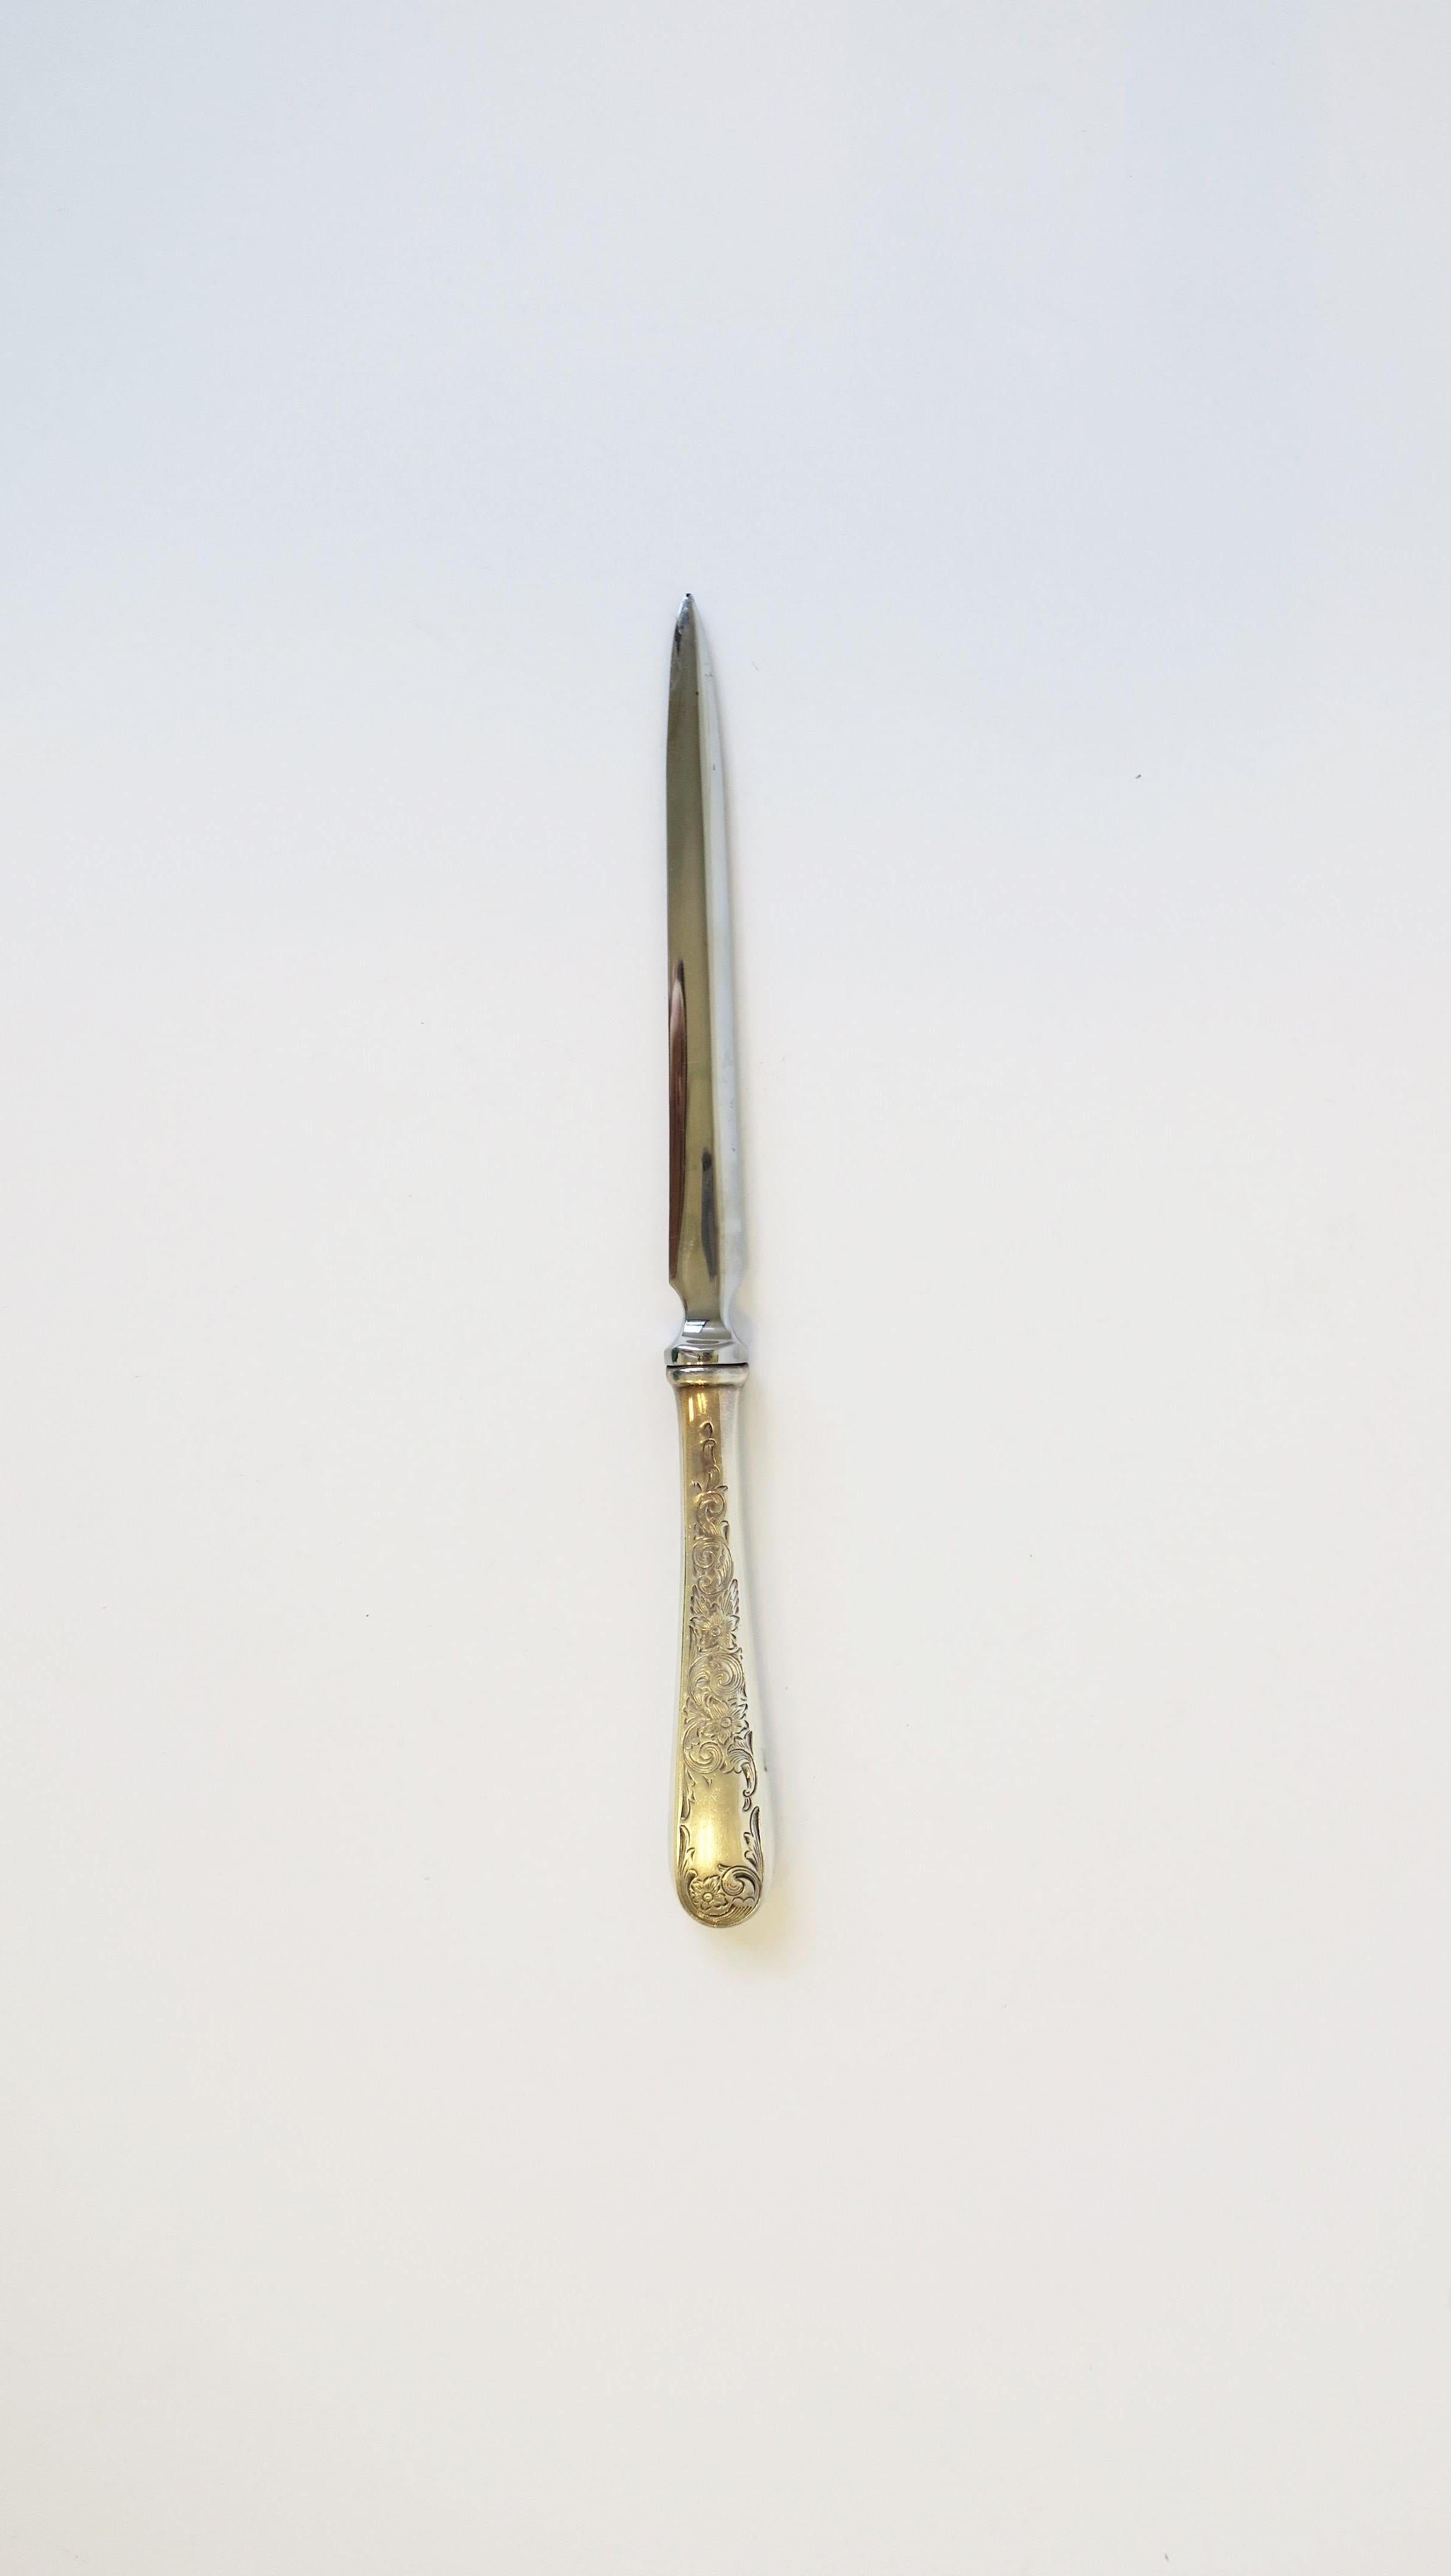 A beautiful vintage sterling silver and stainless-steel letter opener. Handle is sterling silver with decorative details. Blade is stainless-steel. Maker's mark and metal detail shown in image #12: By: Kirk Stieff. 

Measures: 7.75